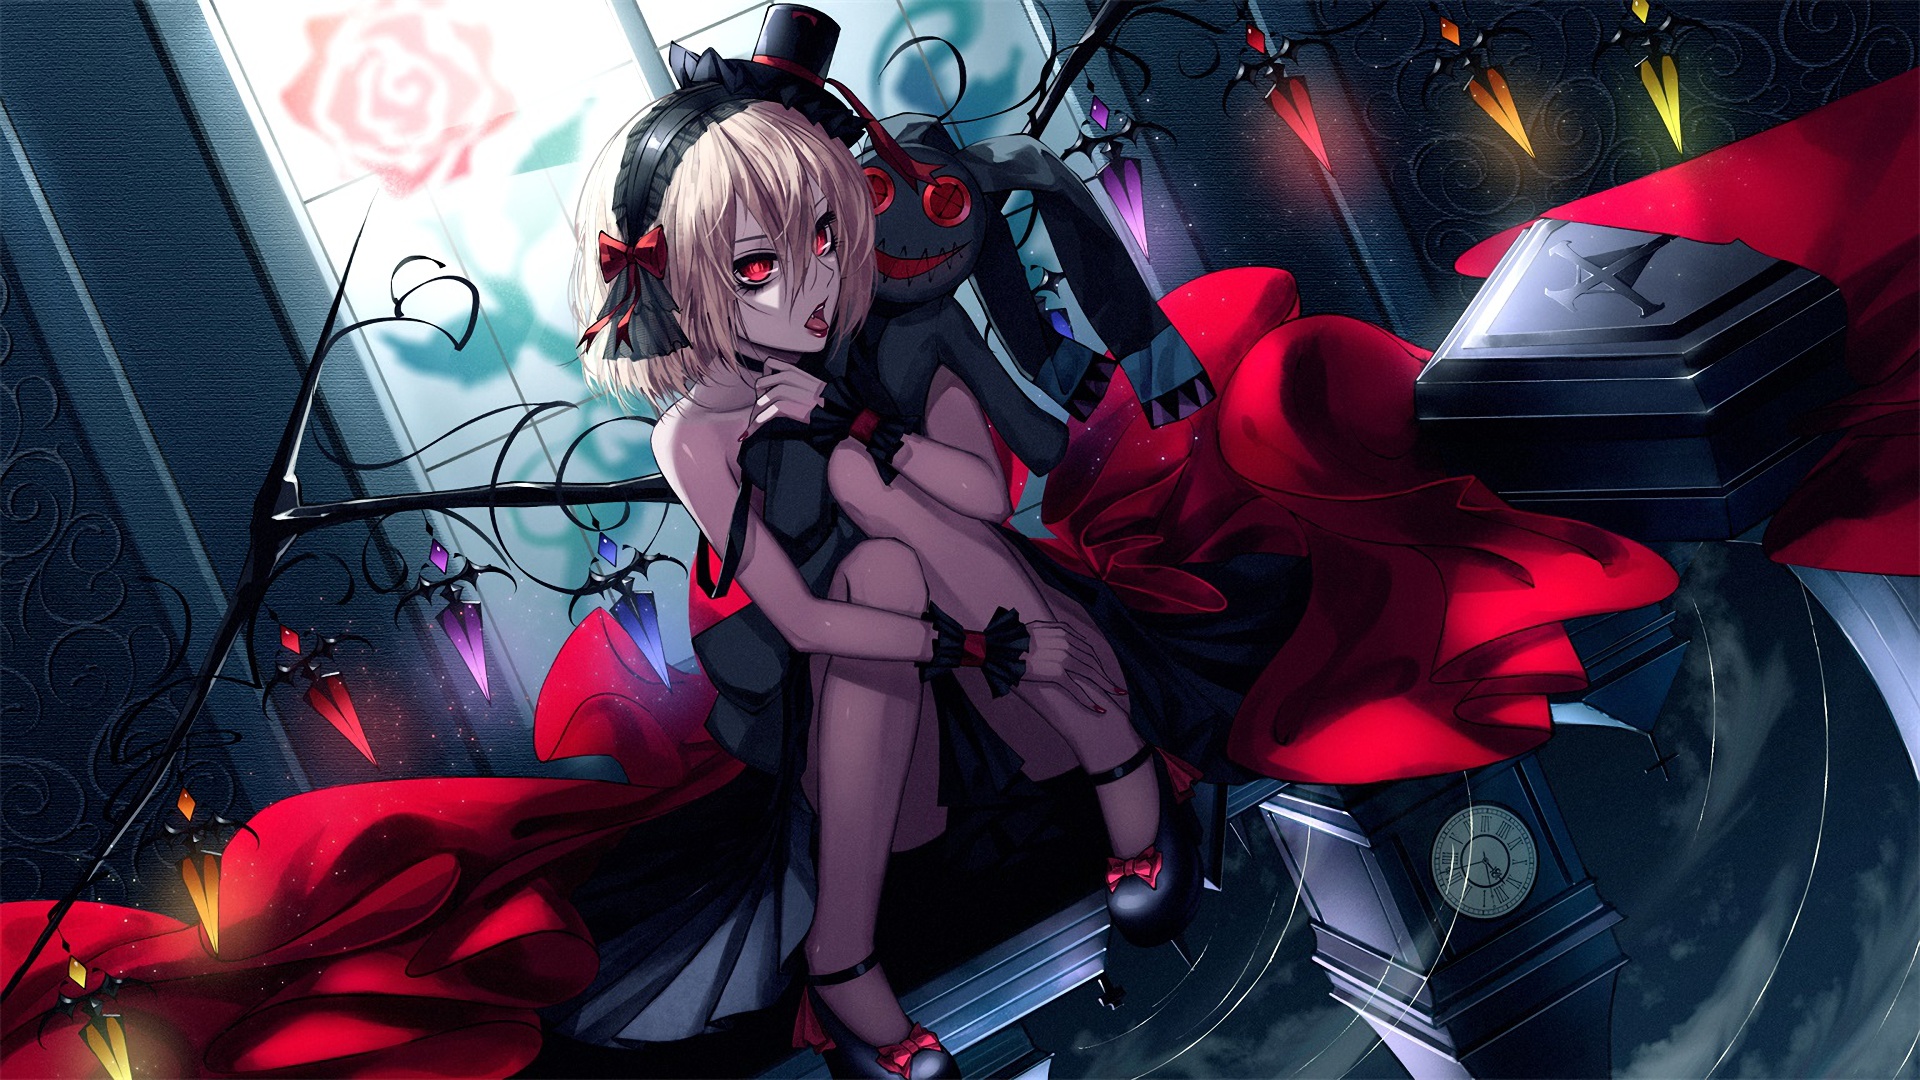 Wallpaper Flandre Scarlet, Touhou, anime girl, red and black dress